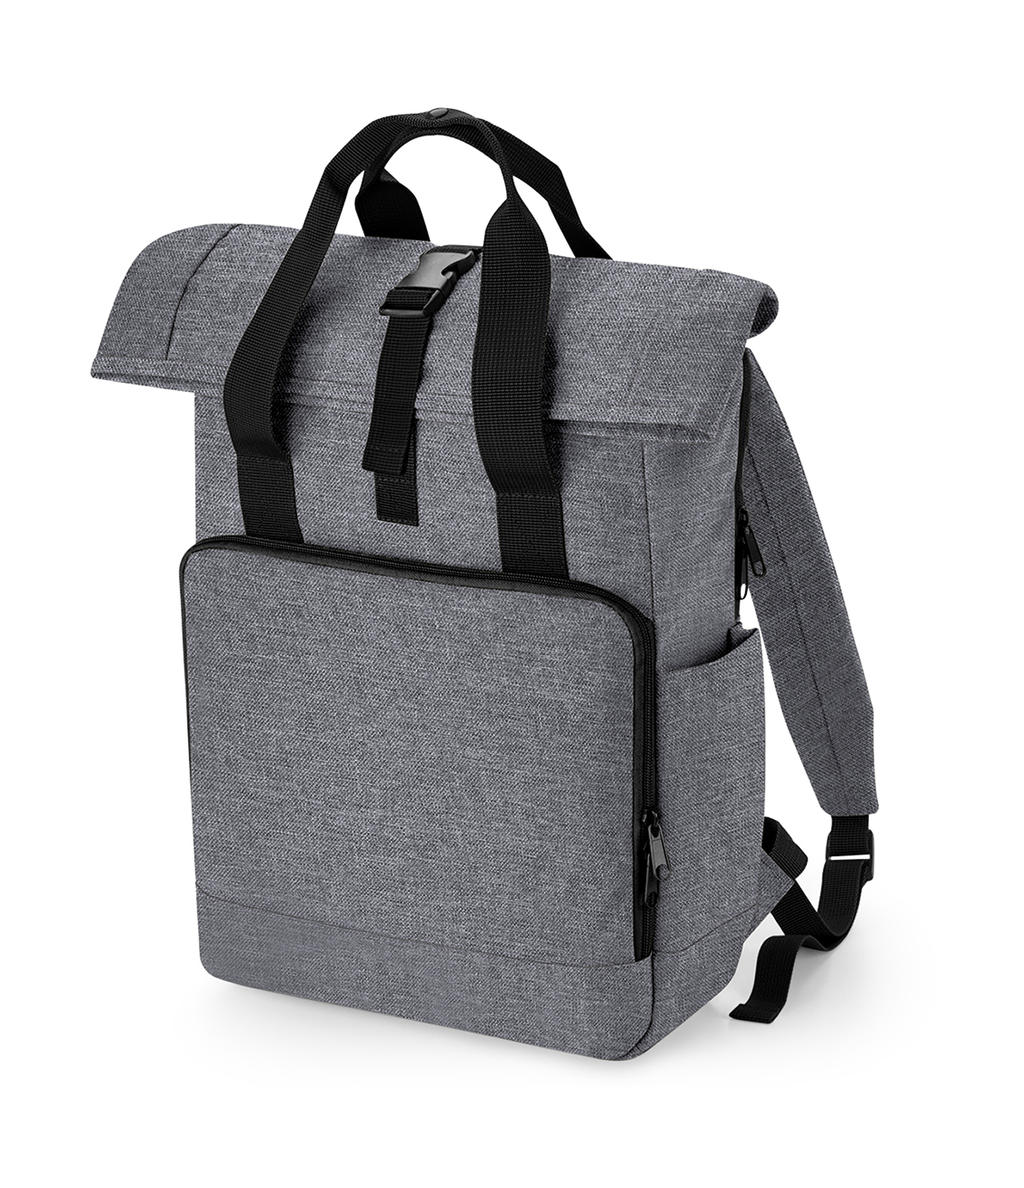  Recycled Twin Handle Roll-Top Laptop Backpack in Farbe Grey Marl